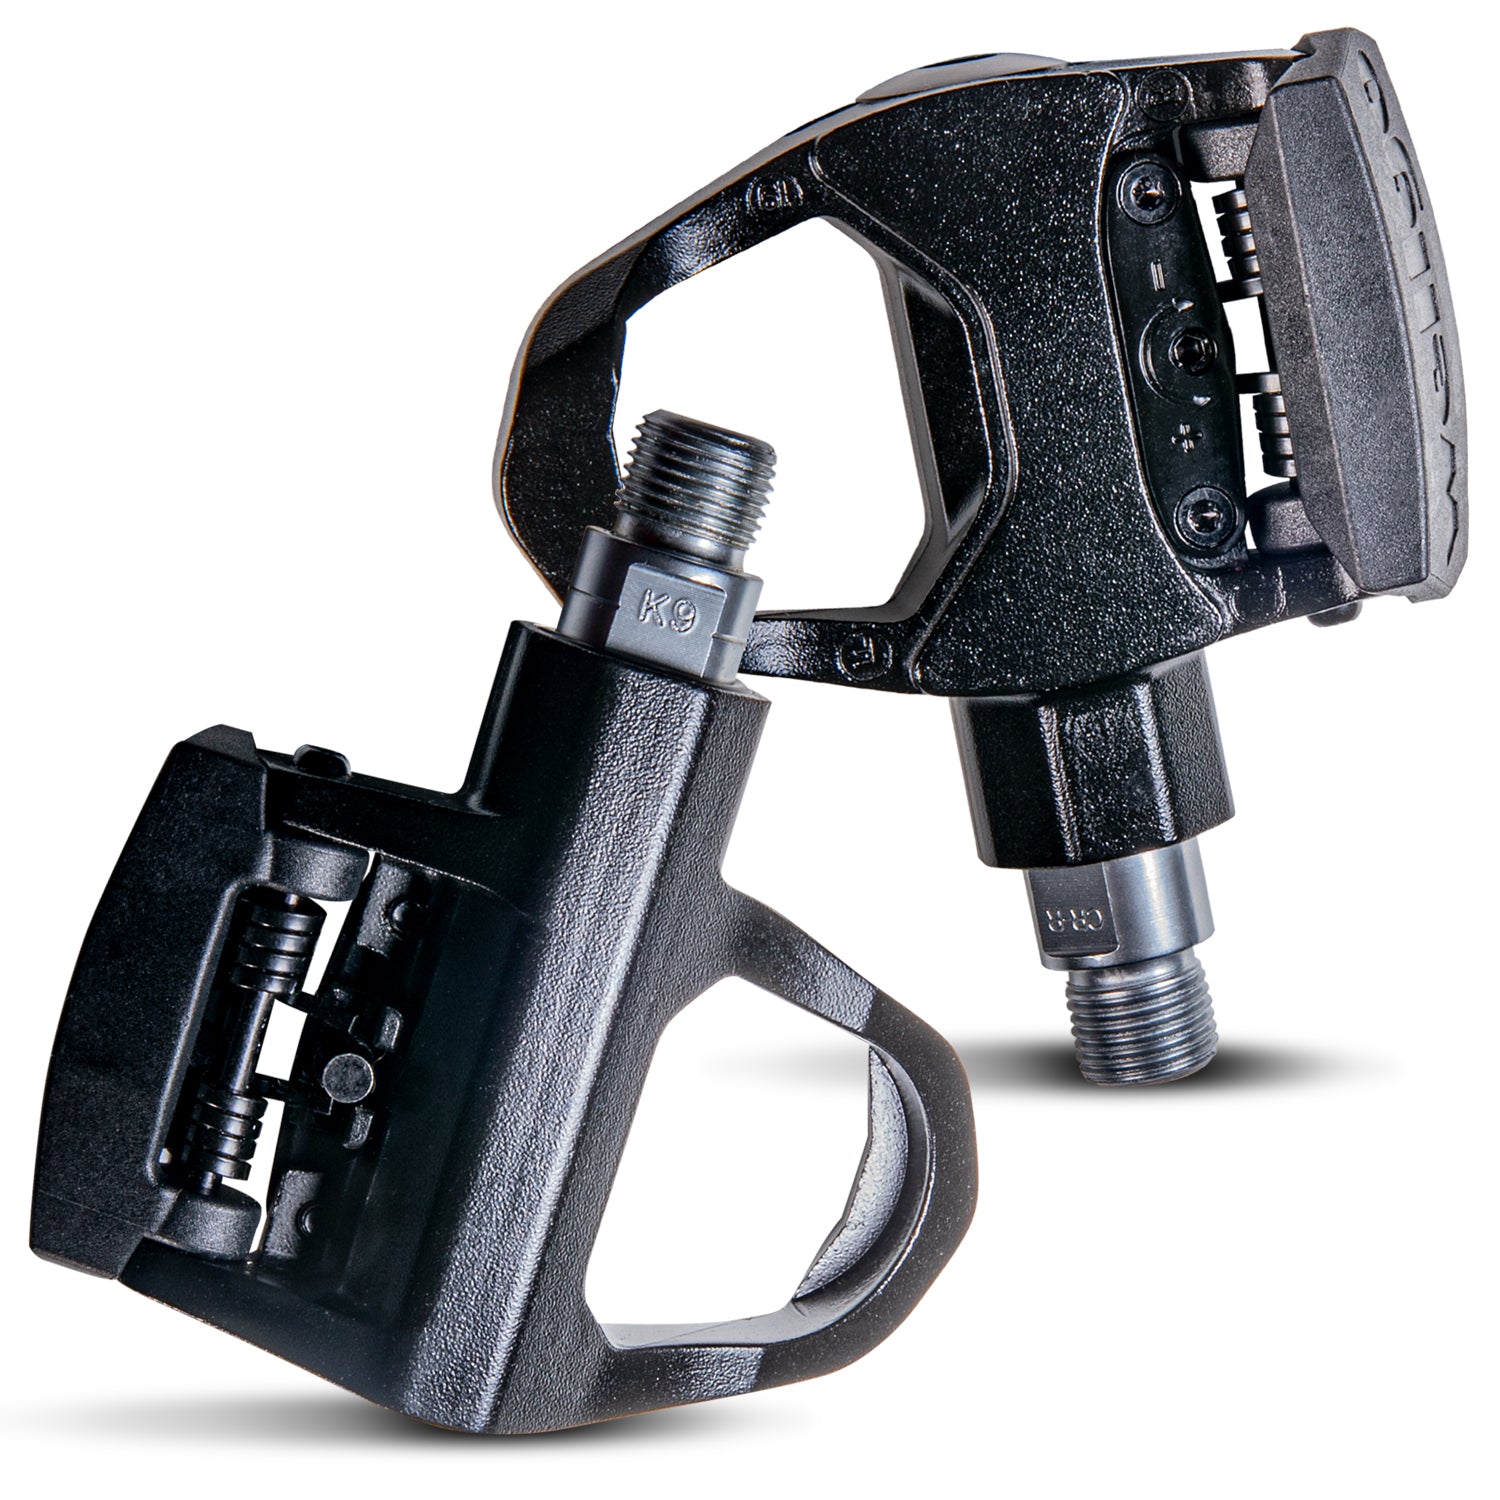 Wellgo Road and Indoor Cycling Pedals Compatbile with Peloton - Zol Cycling